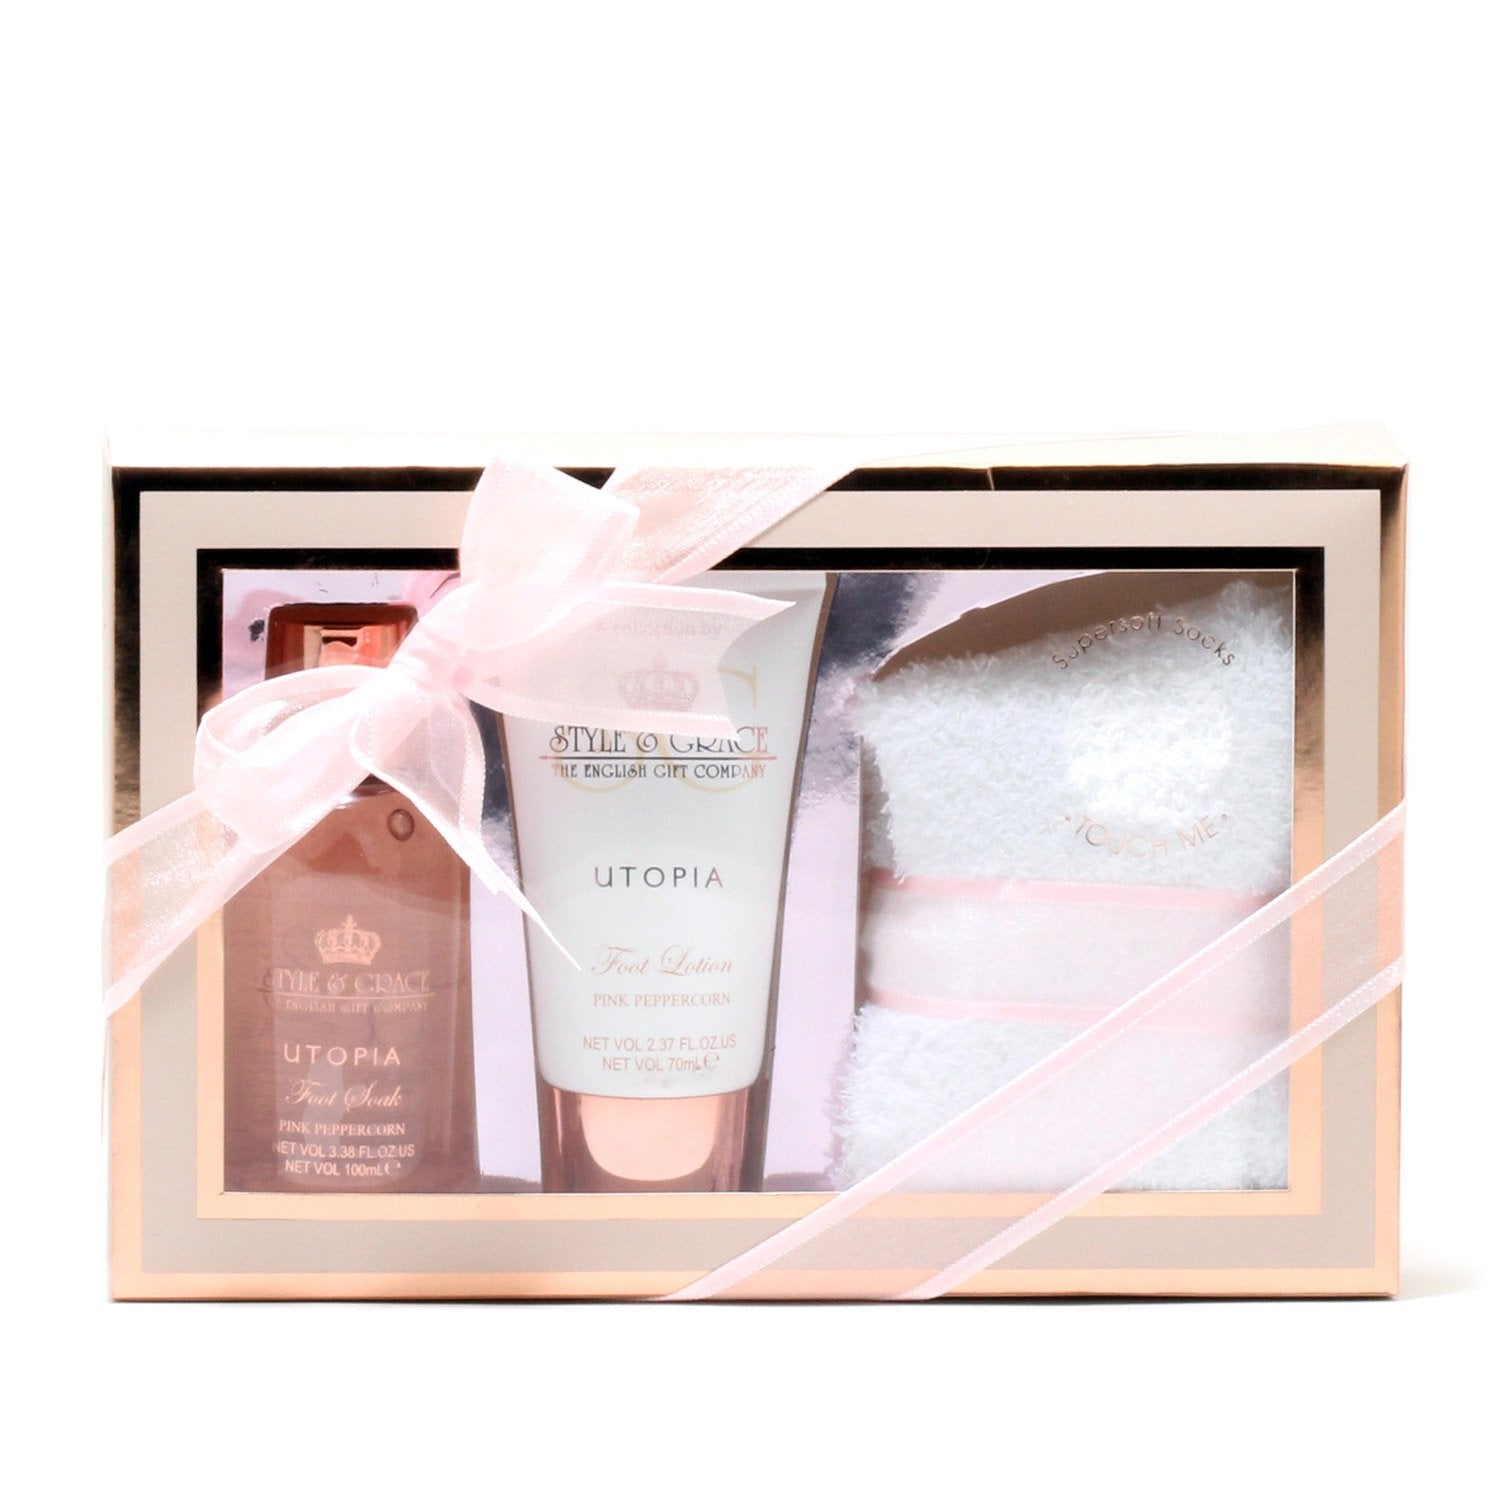 Bath And Body - STYLE & GRACE UTOPIA FOOT CARE PAMPER KIT - GIFT SET